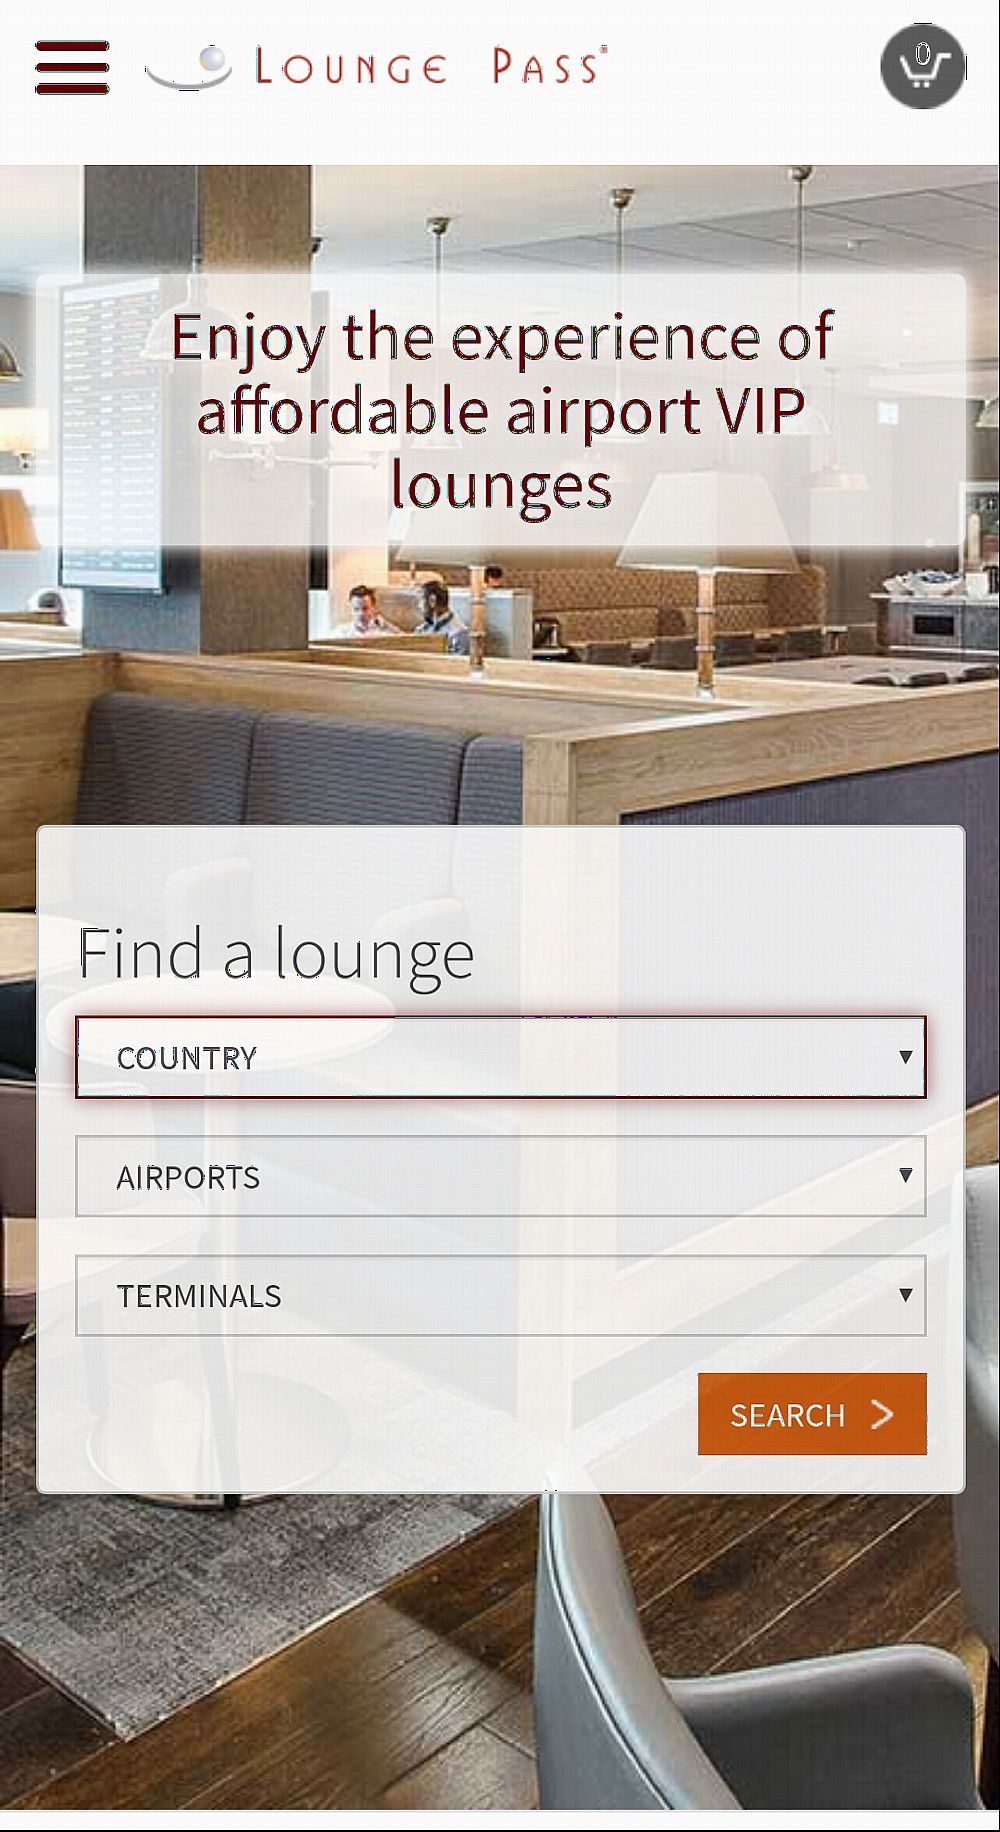 The home page of Lounge Pass